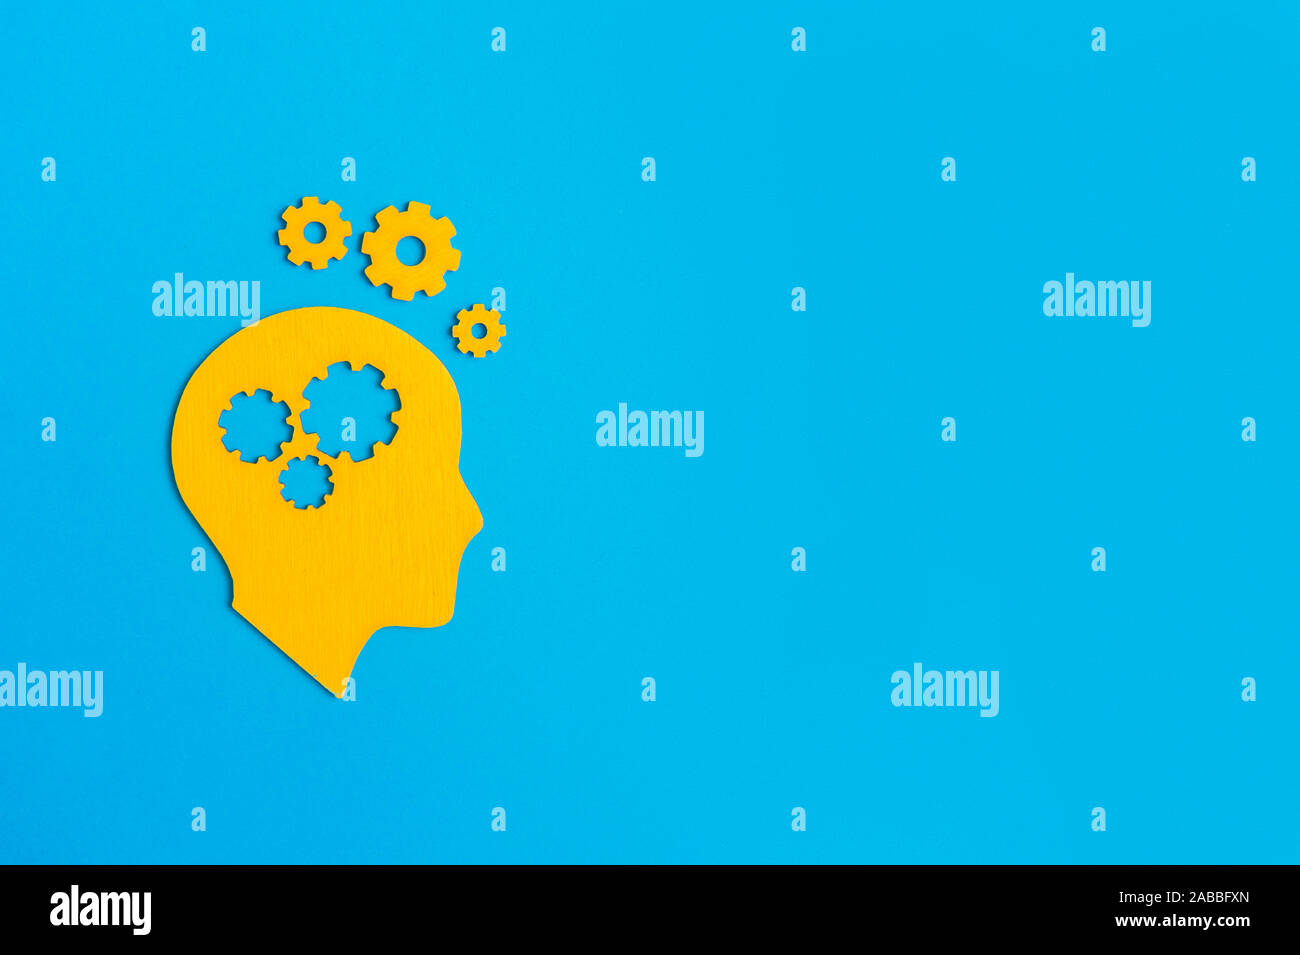 Brain works concept. Thinking, creativity concept of the human head with gears on blue background Stock Photo